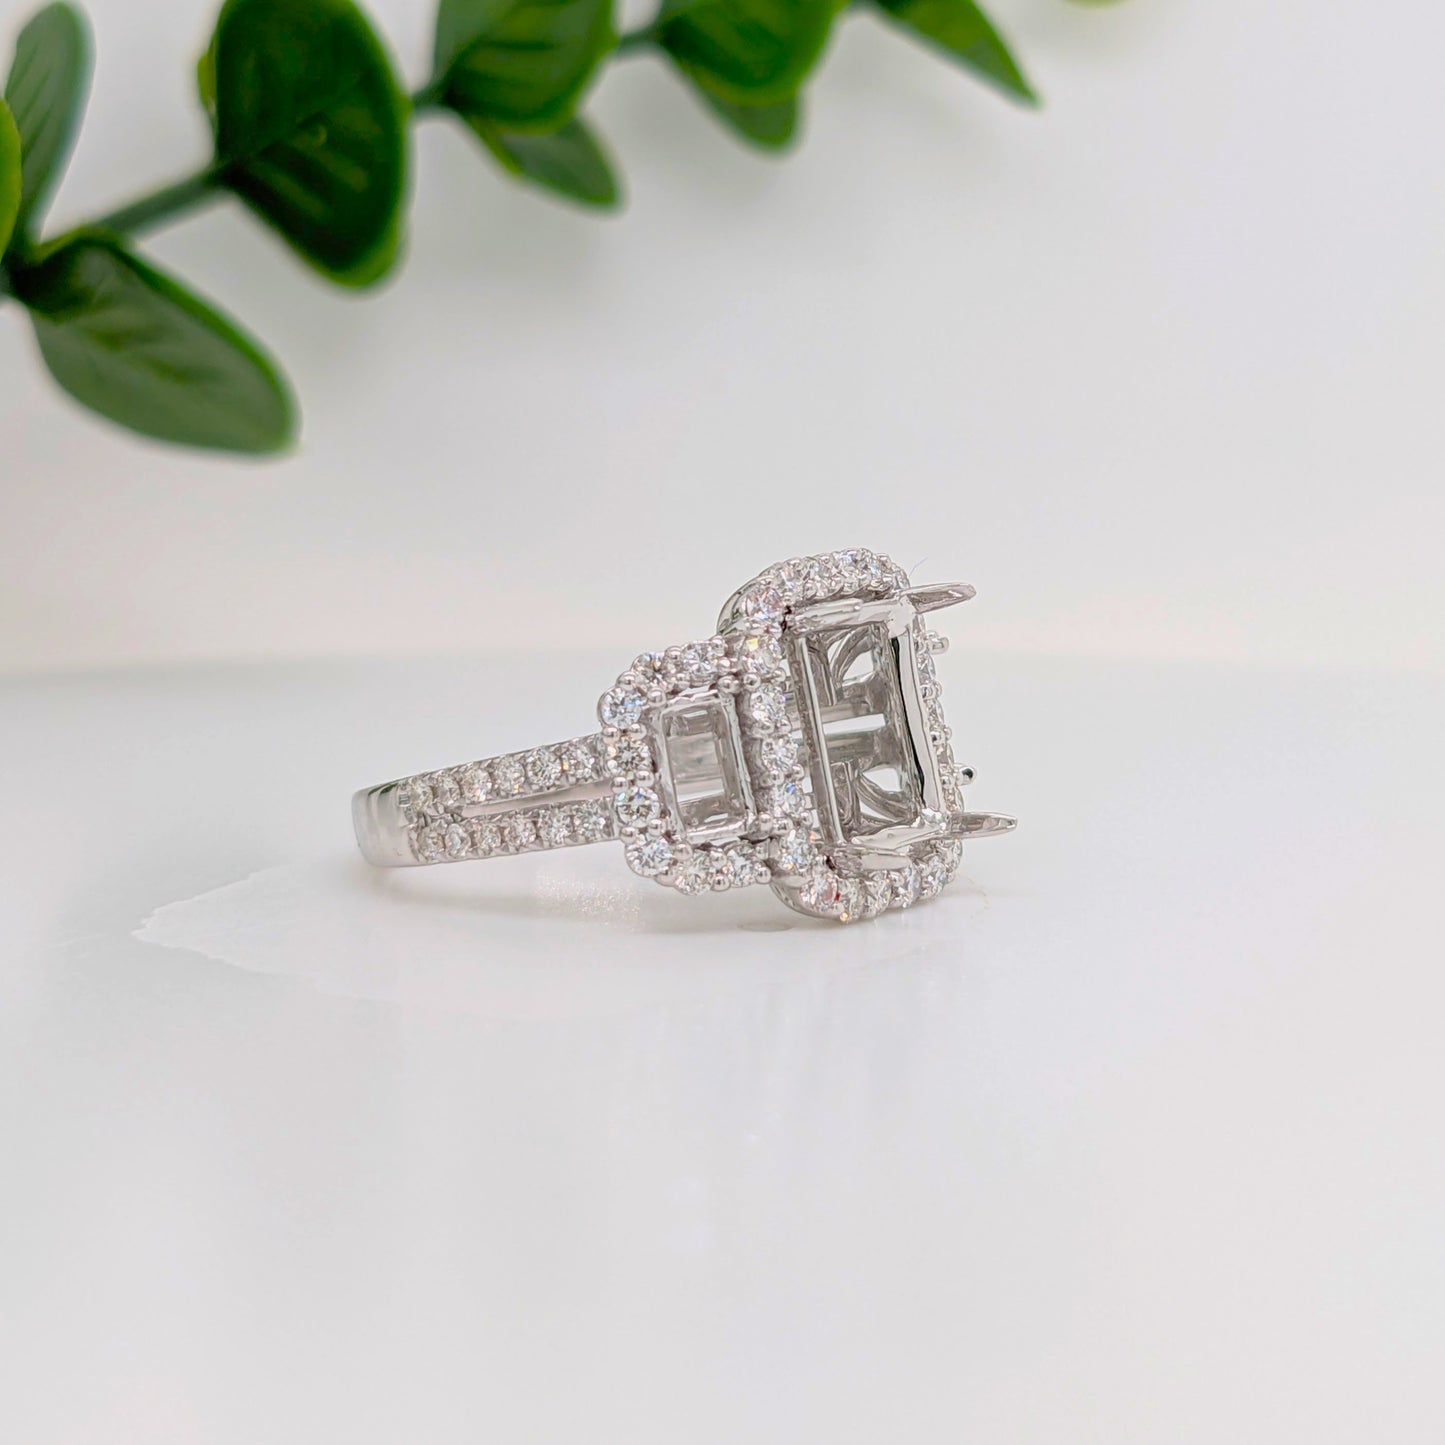 Celeste Collection | Three Stone Ring with 2 Baguette Baskets and a Center Emerald Basket with a Diamond Halo | Ring Setting in 14k Solid Gold w Pave Split Shank | Emerald Cut